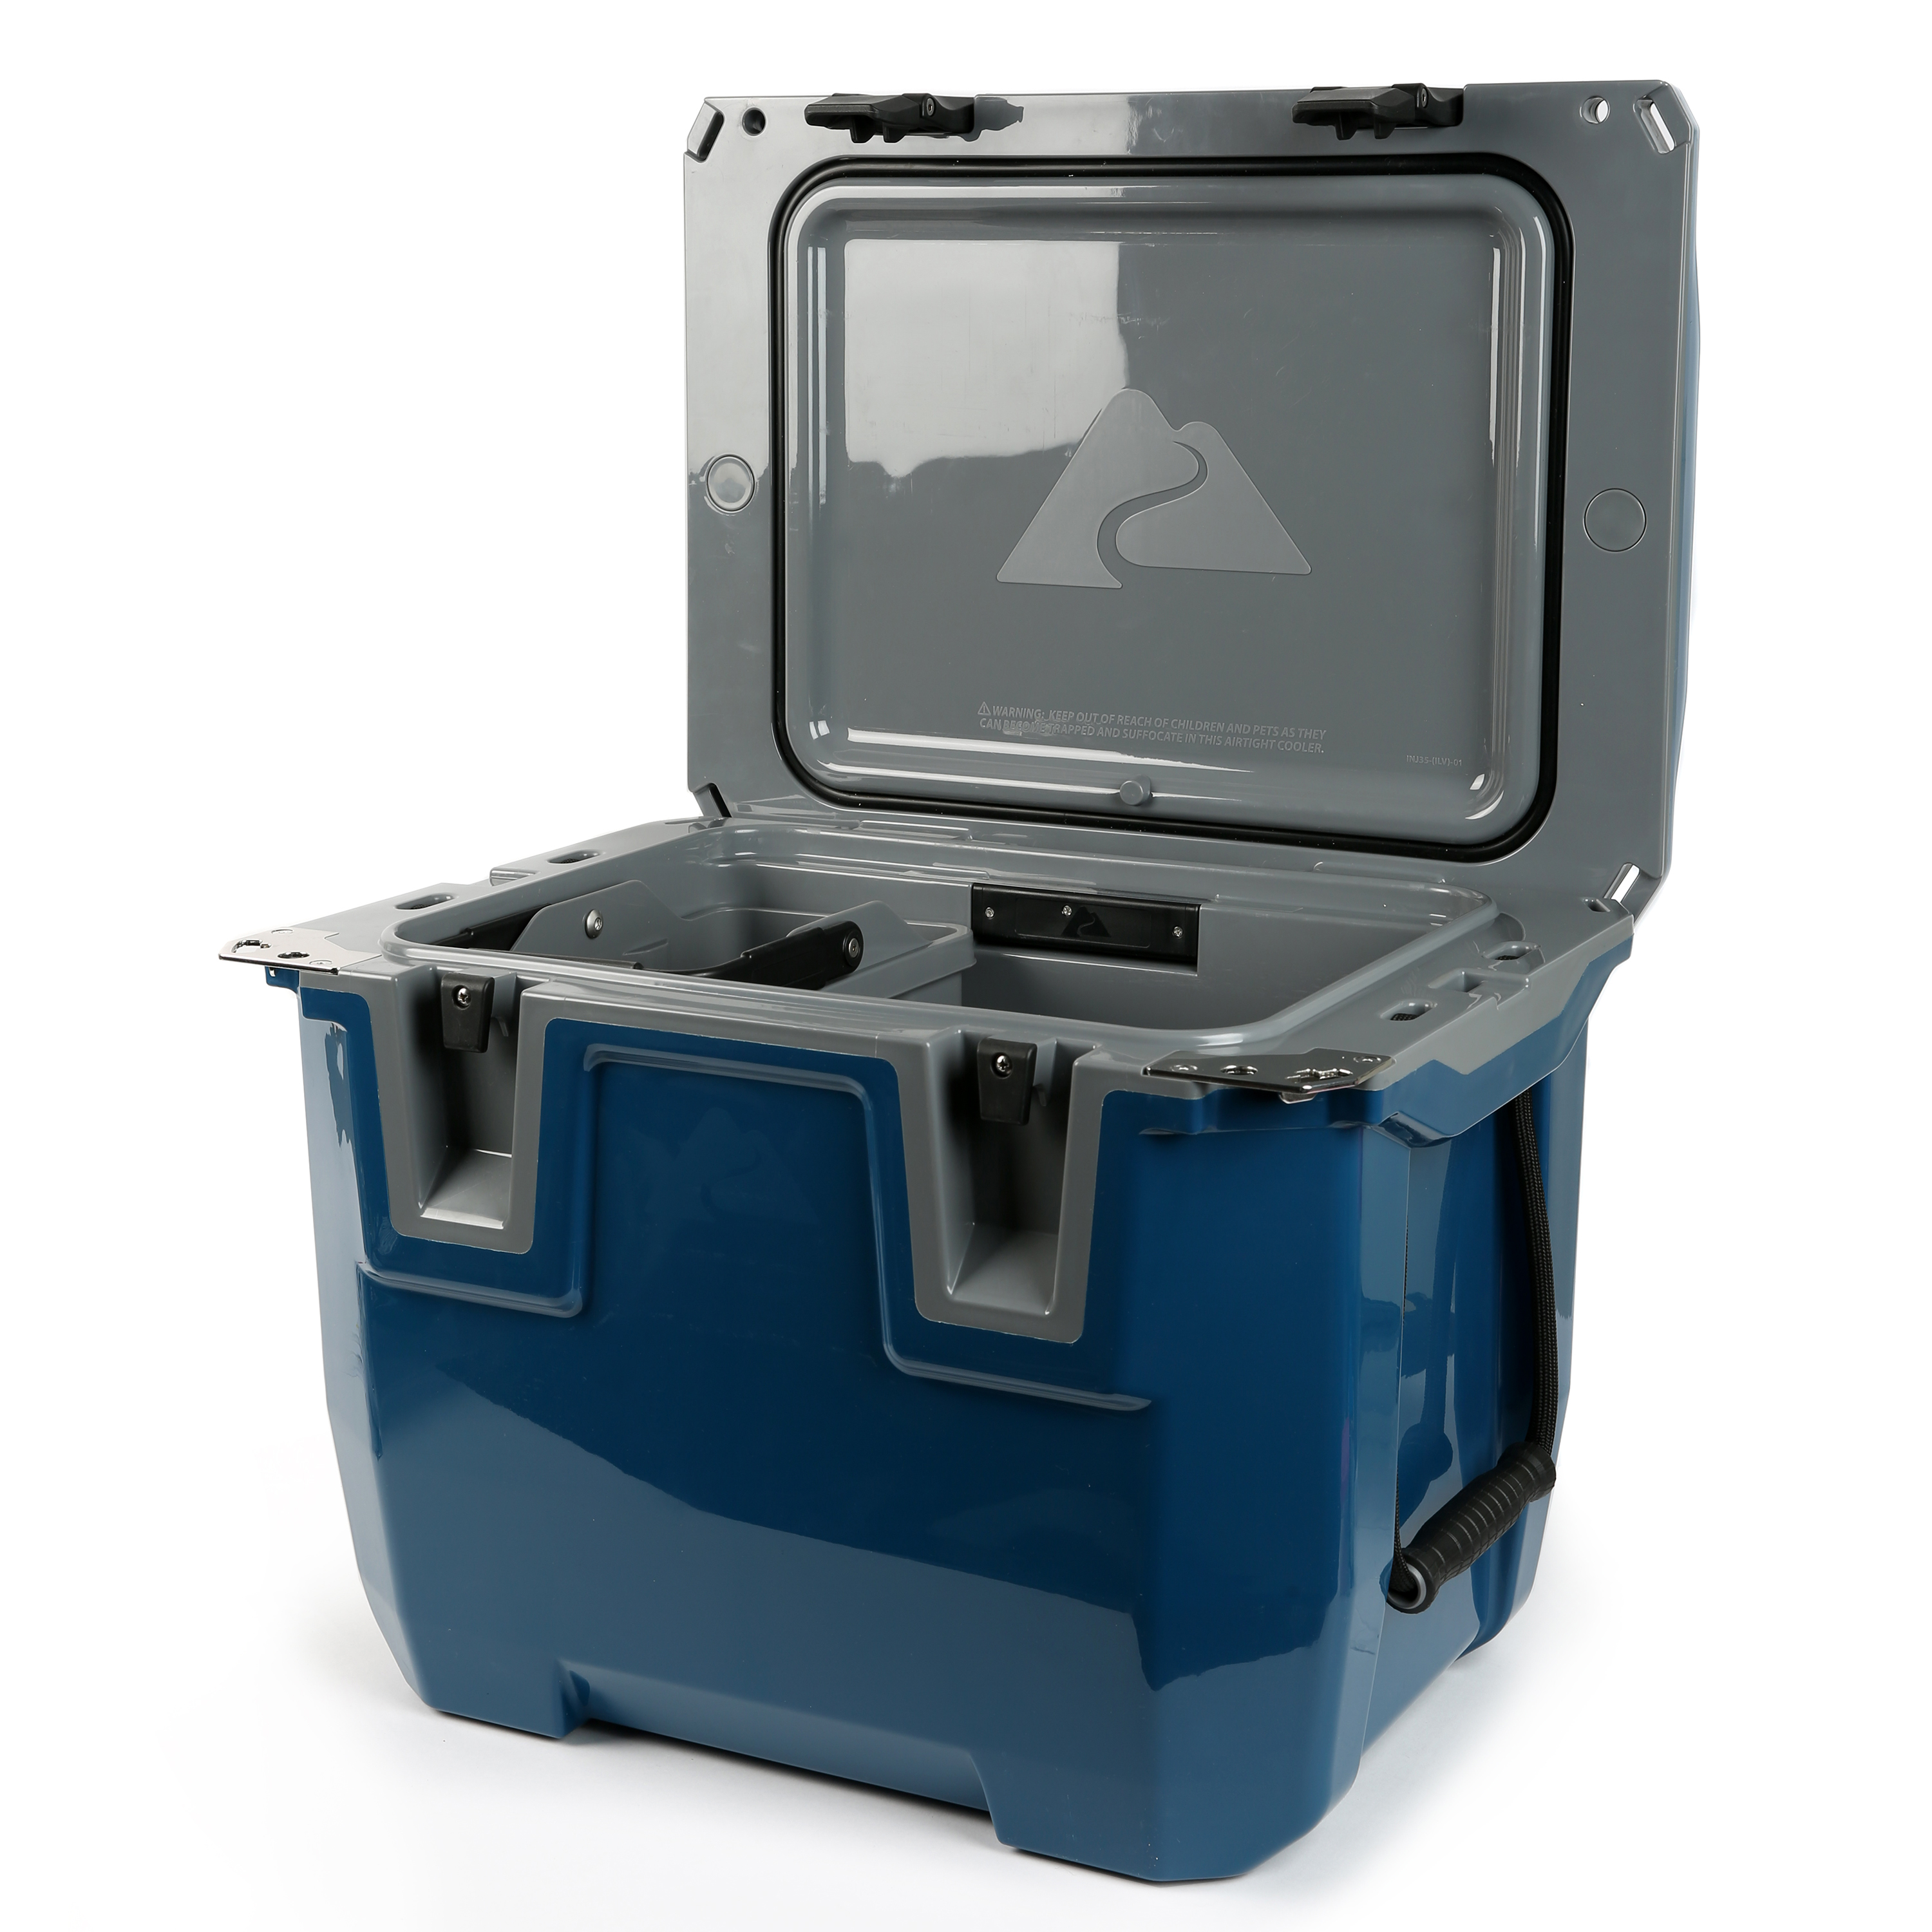 Ozark Trail 35 Quart Hard Sided Cooler with Microban Protection, Stainless Steel Locking Plate, Blue - image 4 of 14